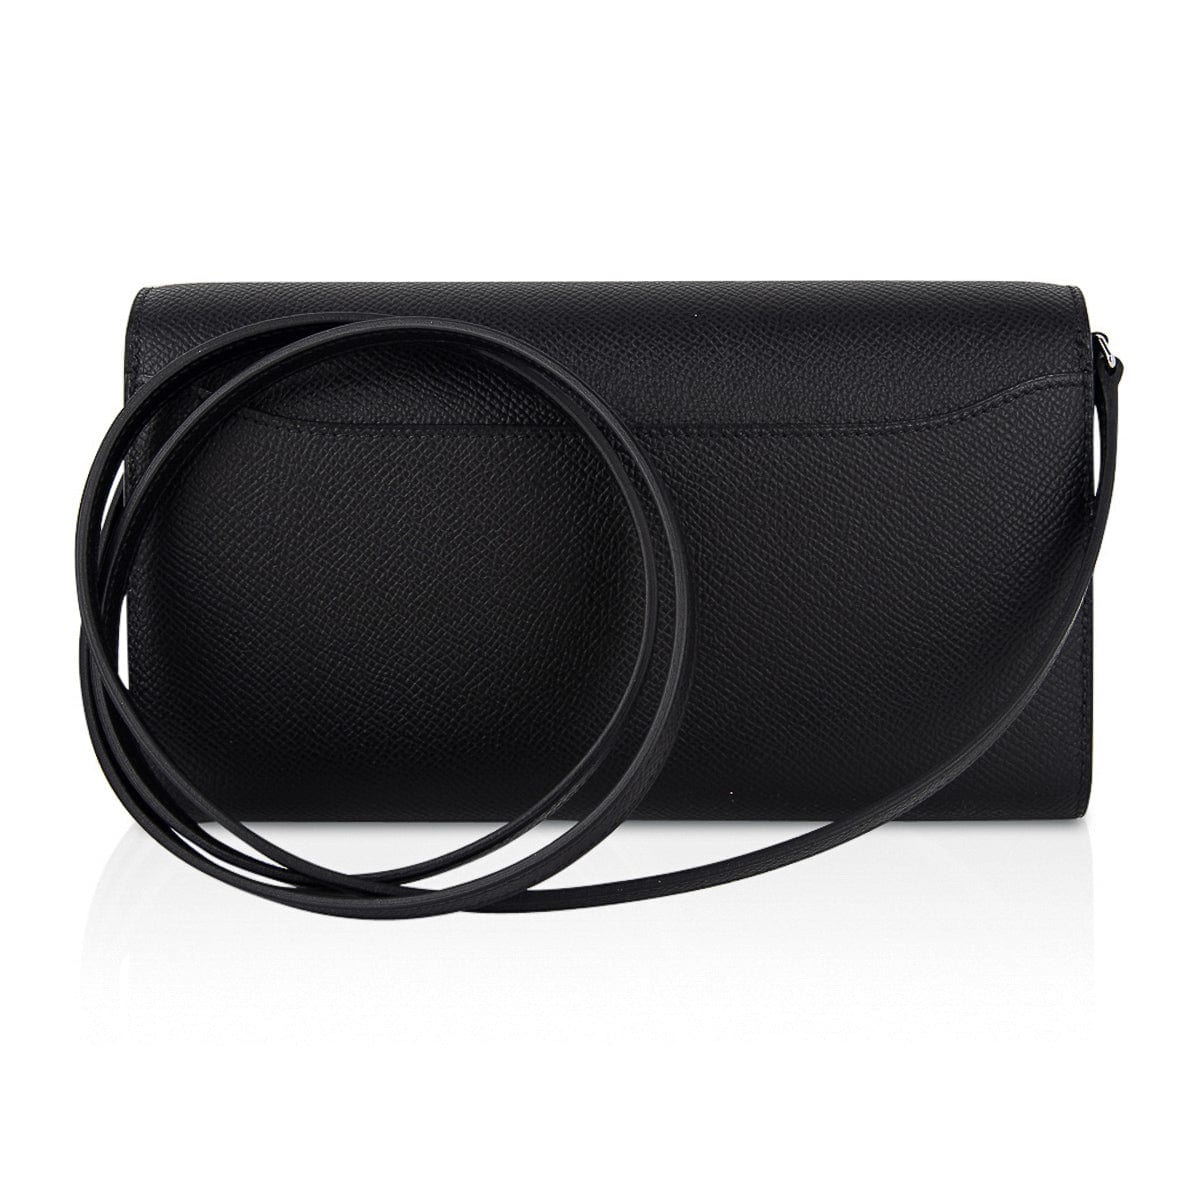 Hermes Constance Long To Go Wallet Black Epsom with Palladium Hardware